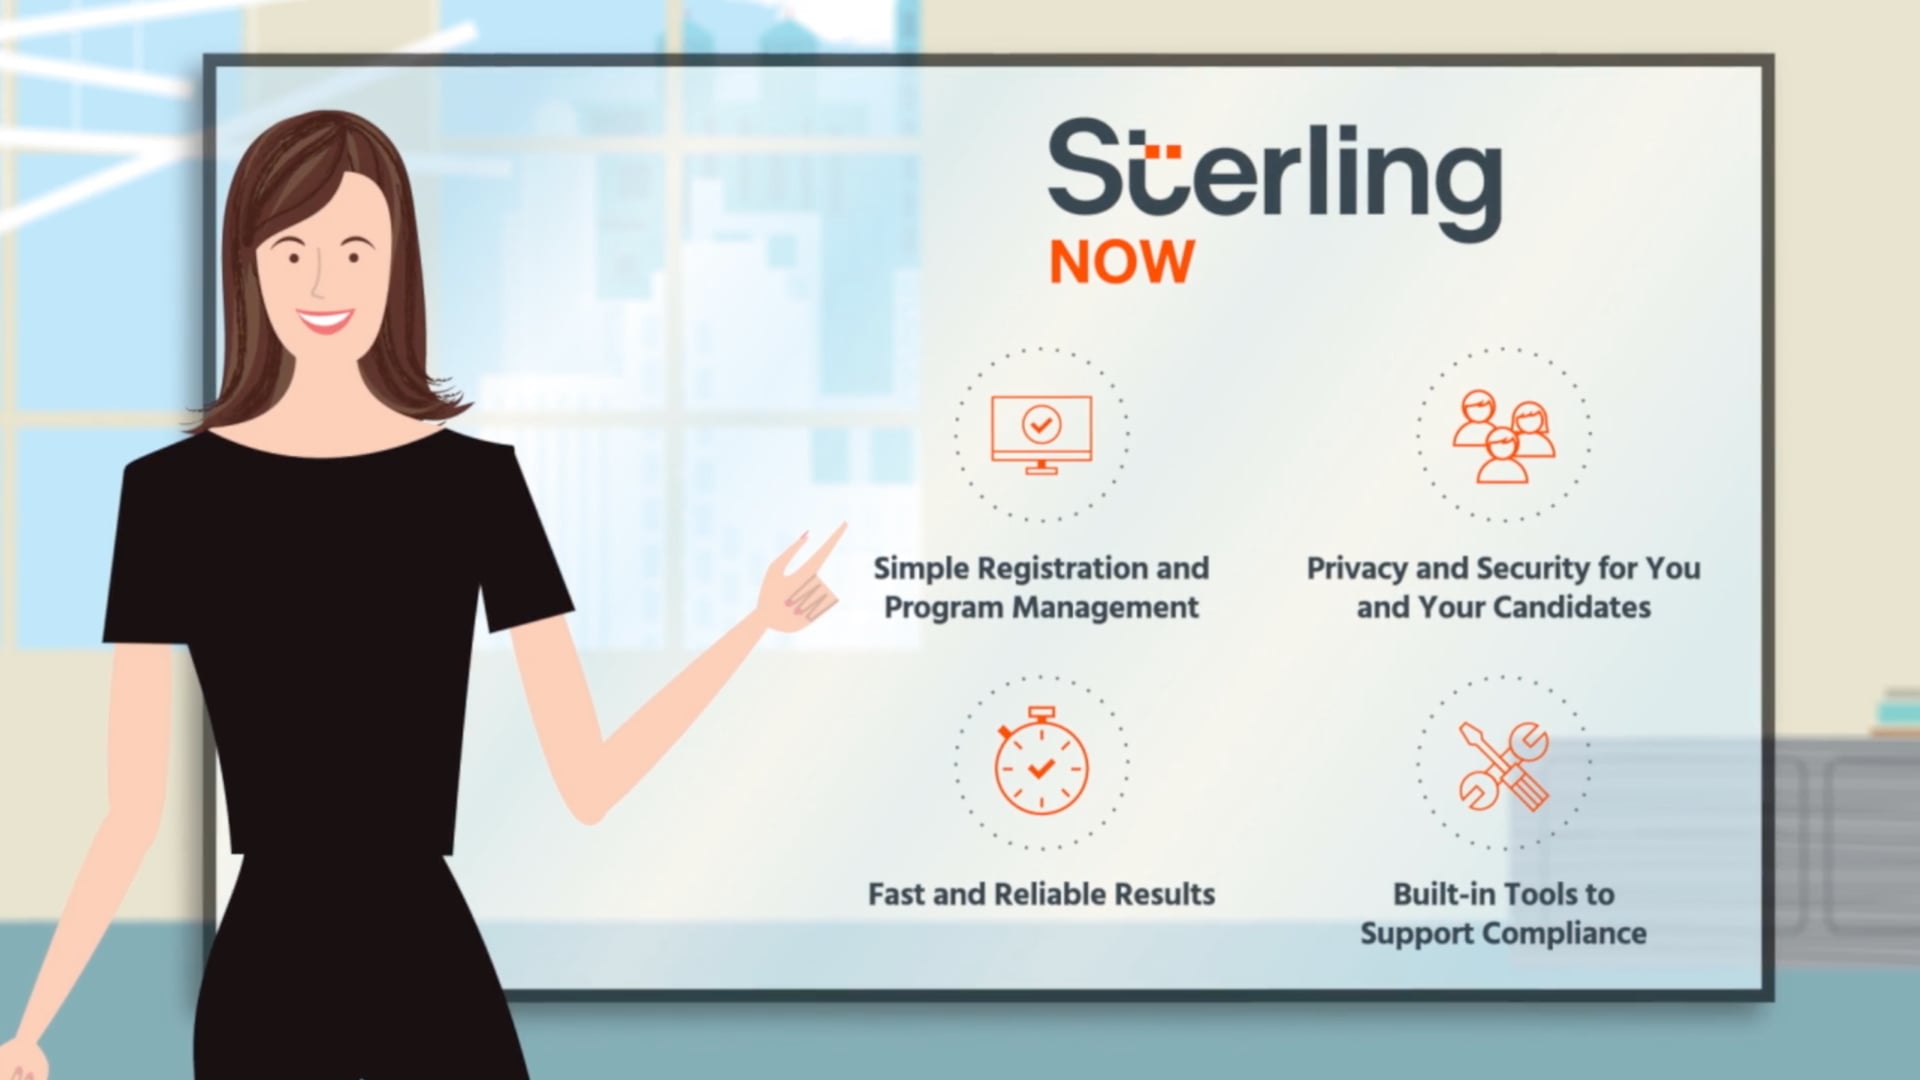 STERLING NOW Animated Explainer